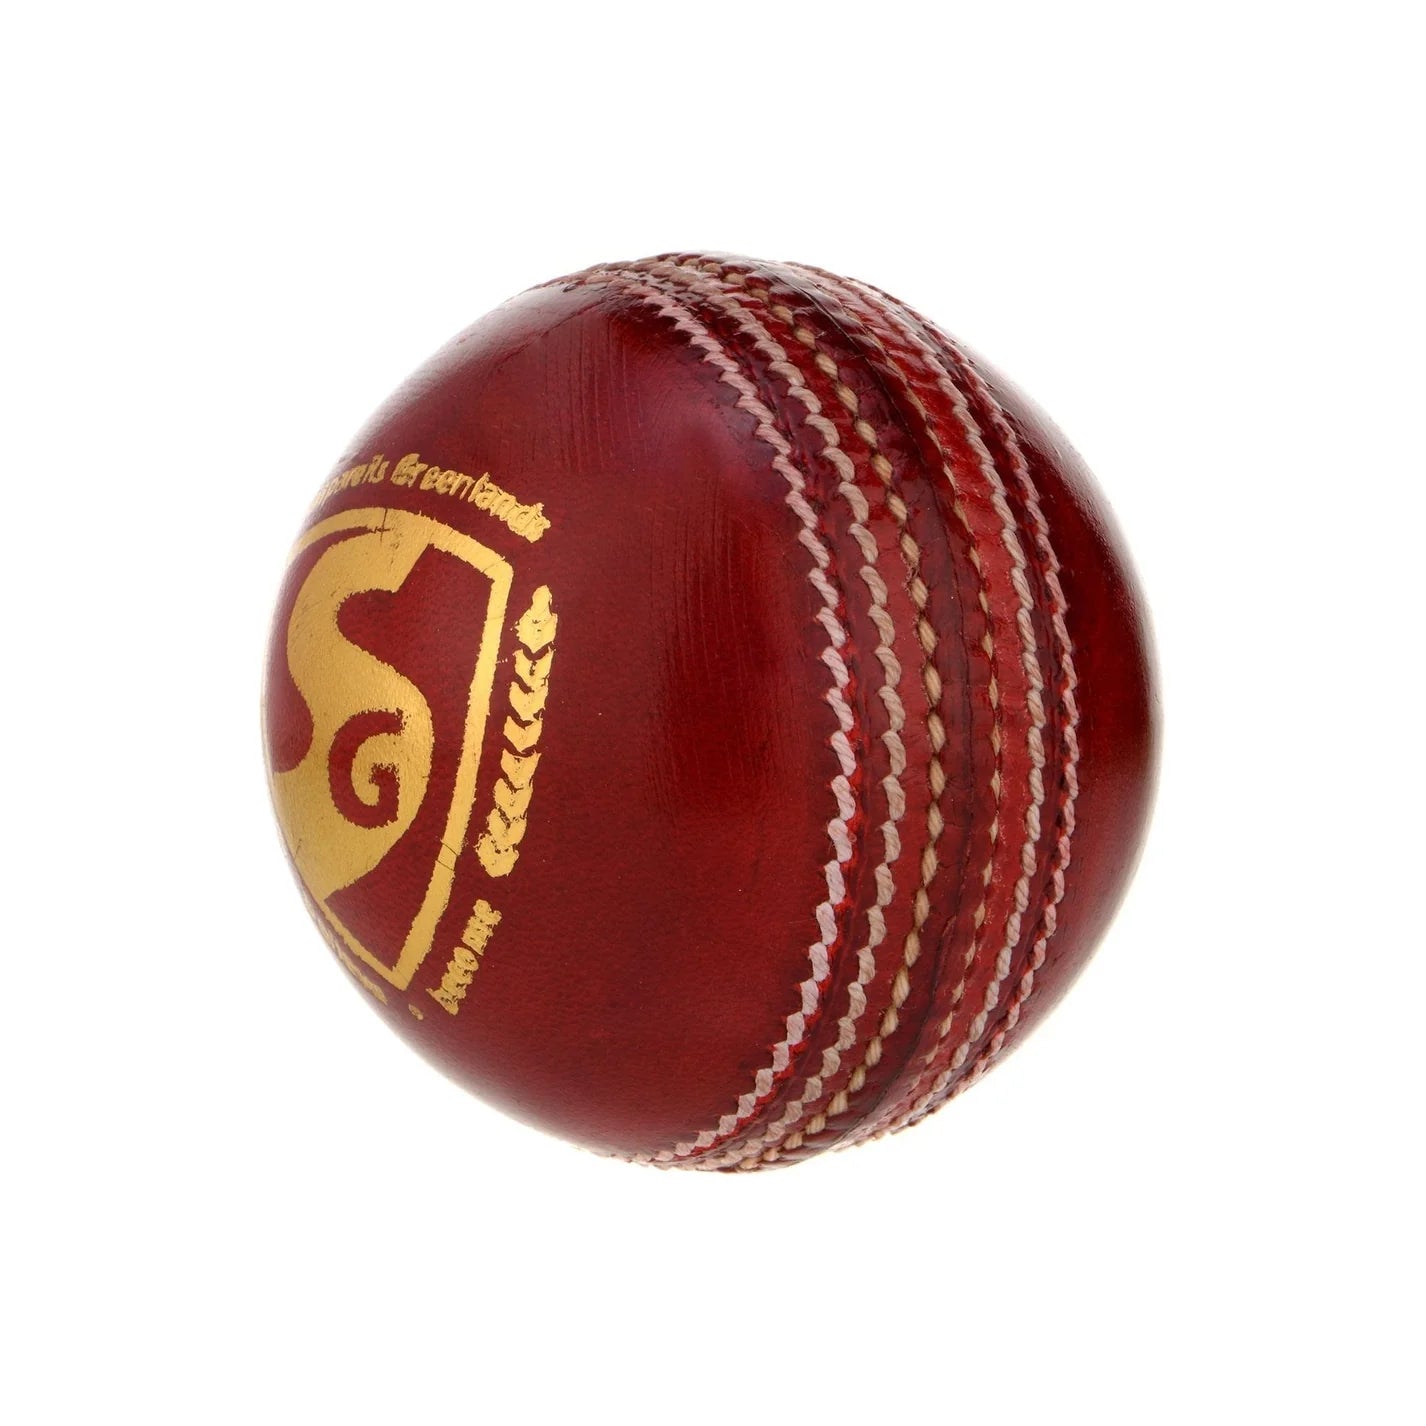 SG Shield 20 Good Quality Two-Piece Water Proof Cricket Leather Ball